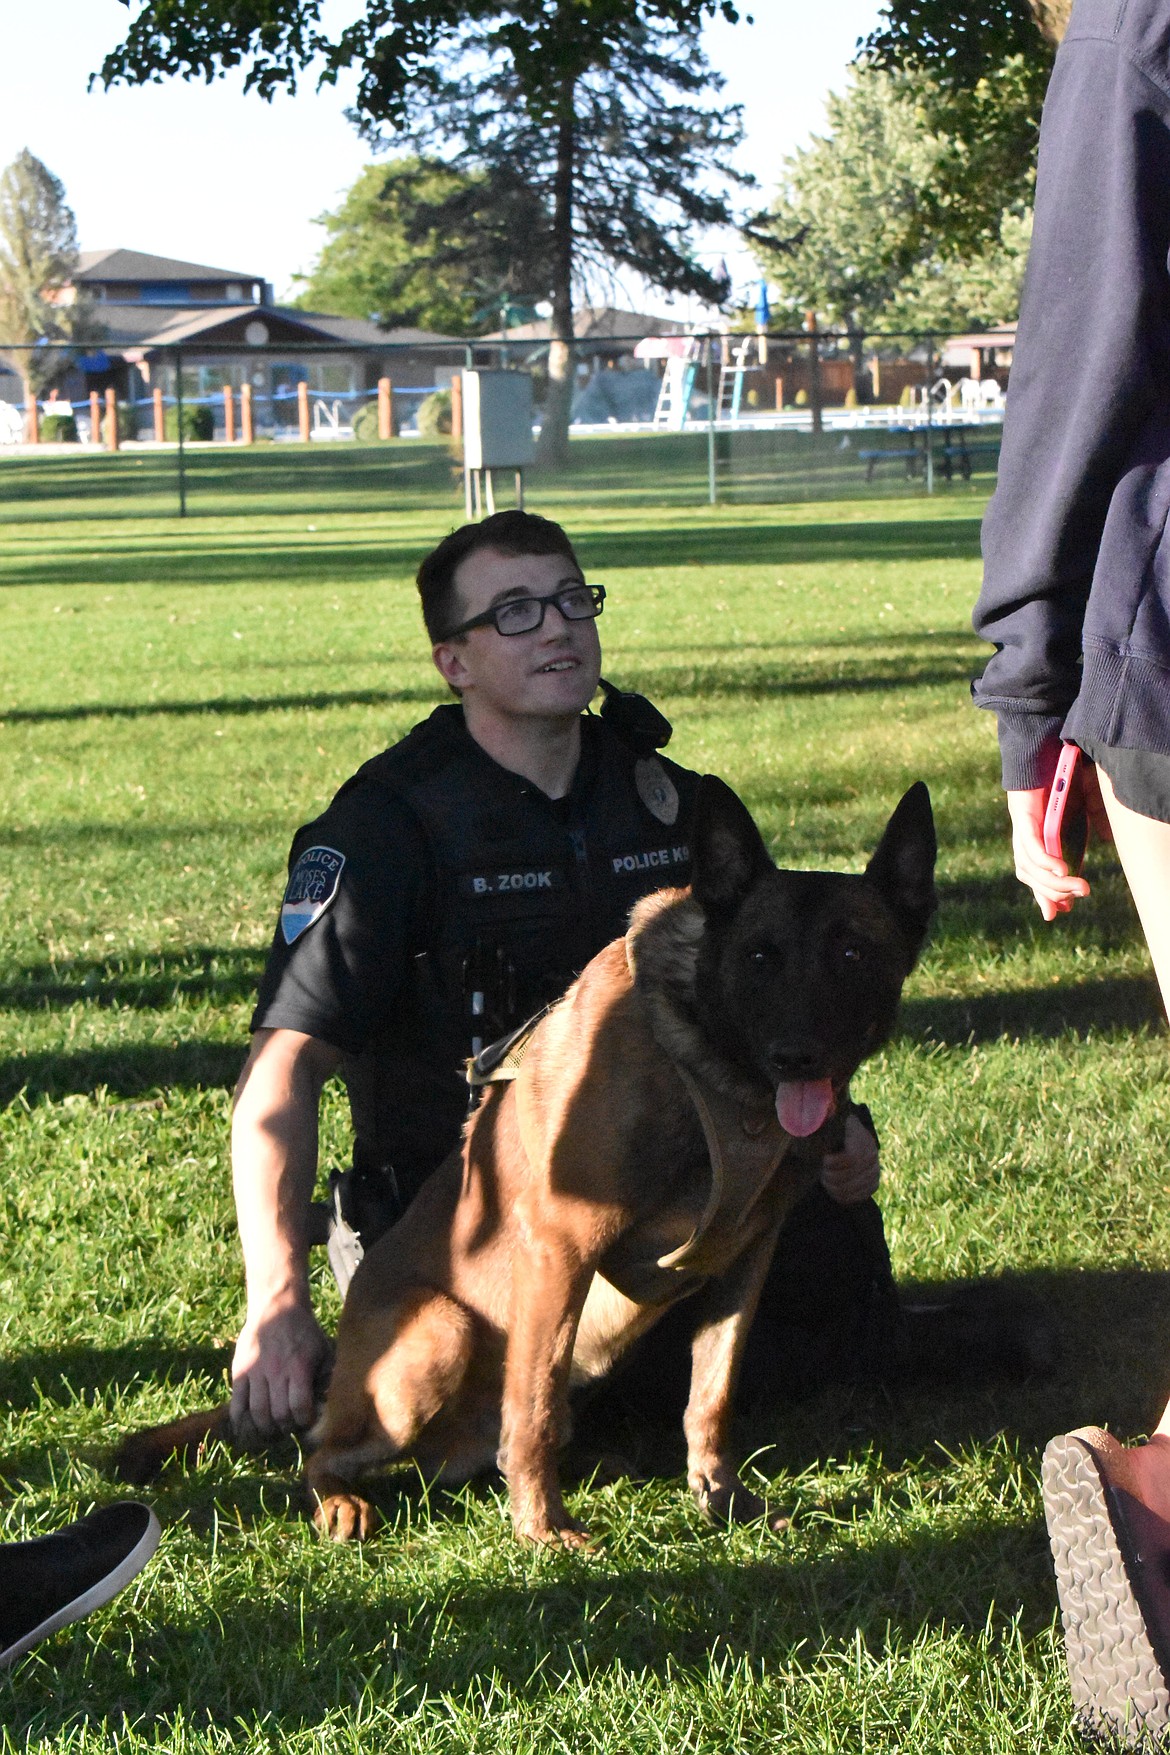 Moses Lake Police Officer Brad Zook and K-9 Rex were at Moses Lake National Night out Aug. 2.